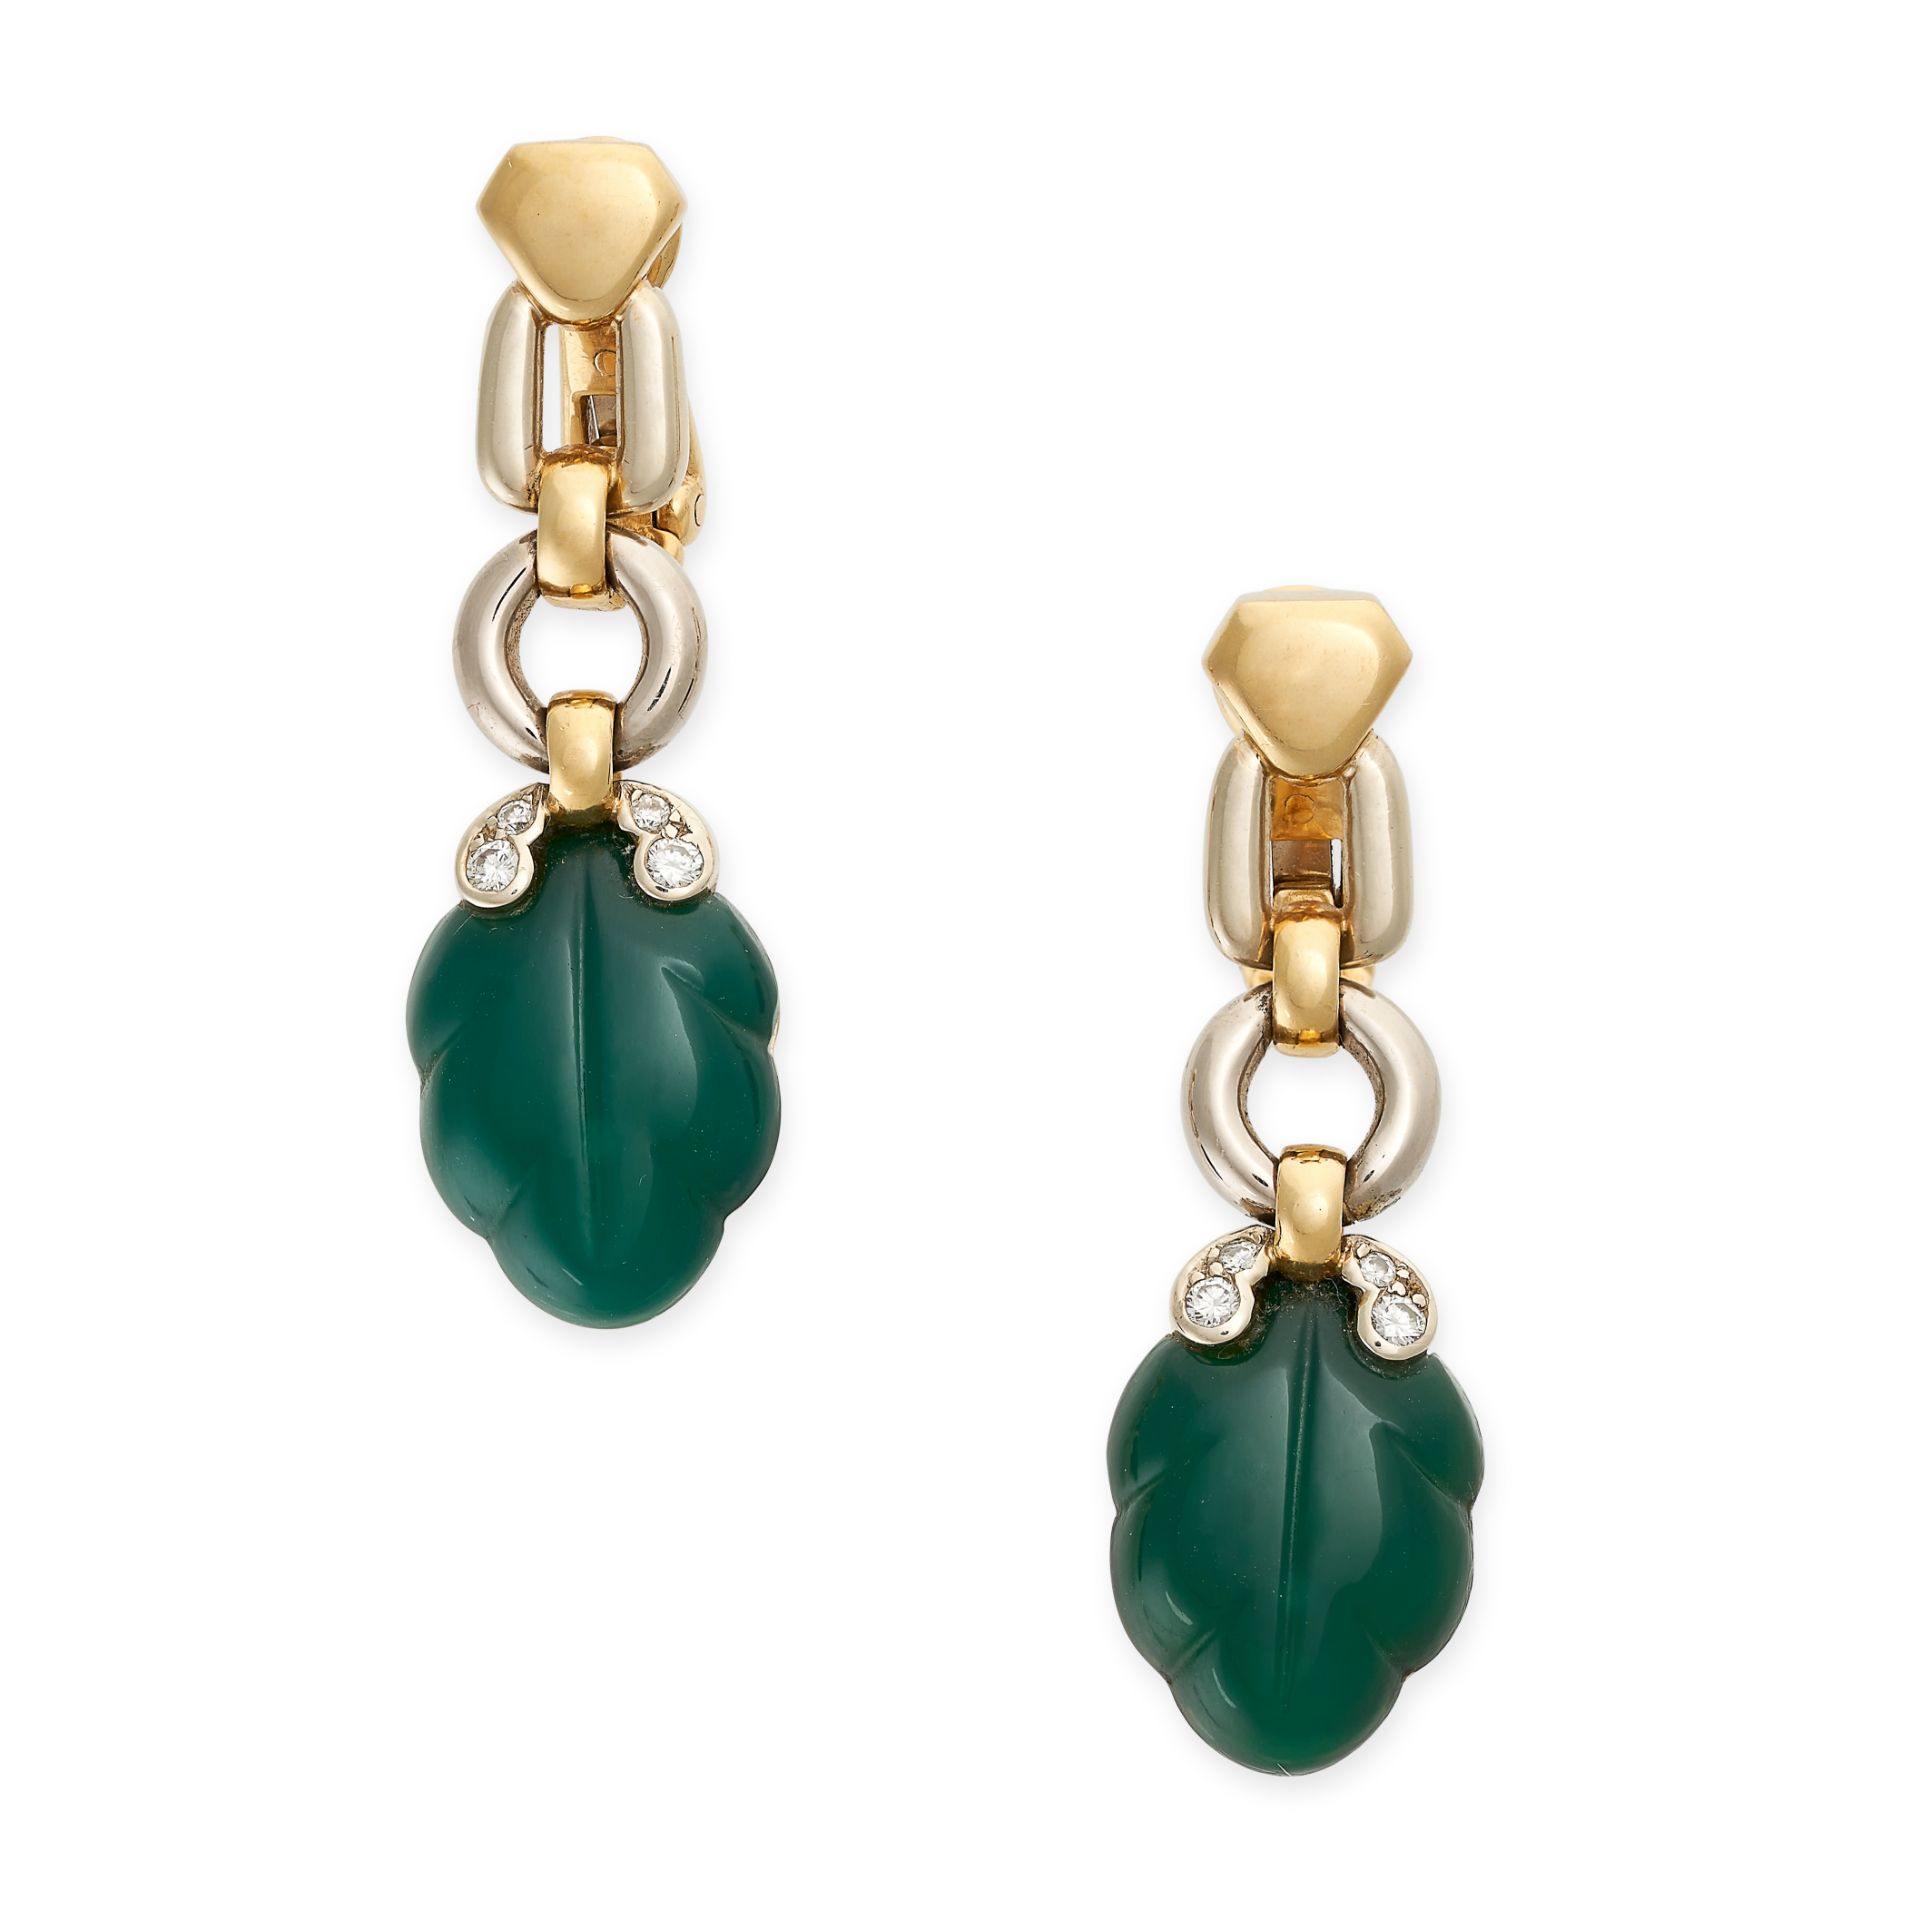 CARTIER, A PAIR OF CHRYSOPRASE AND DIAMOND EARRINGS, 1990 in 18ct white and yellow gold, each